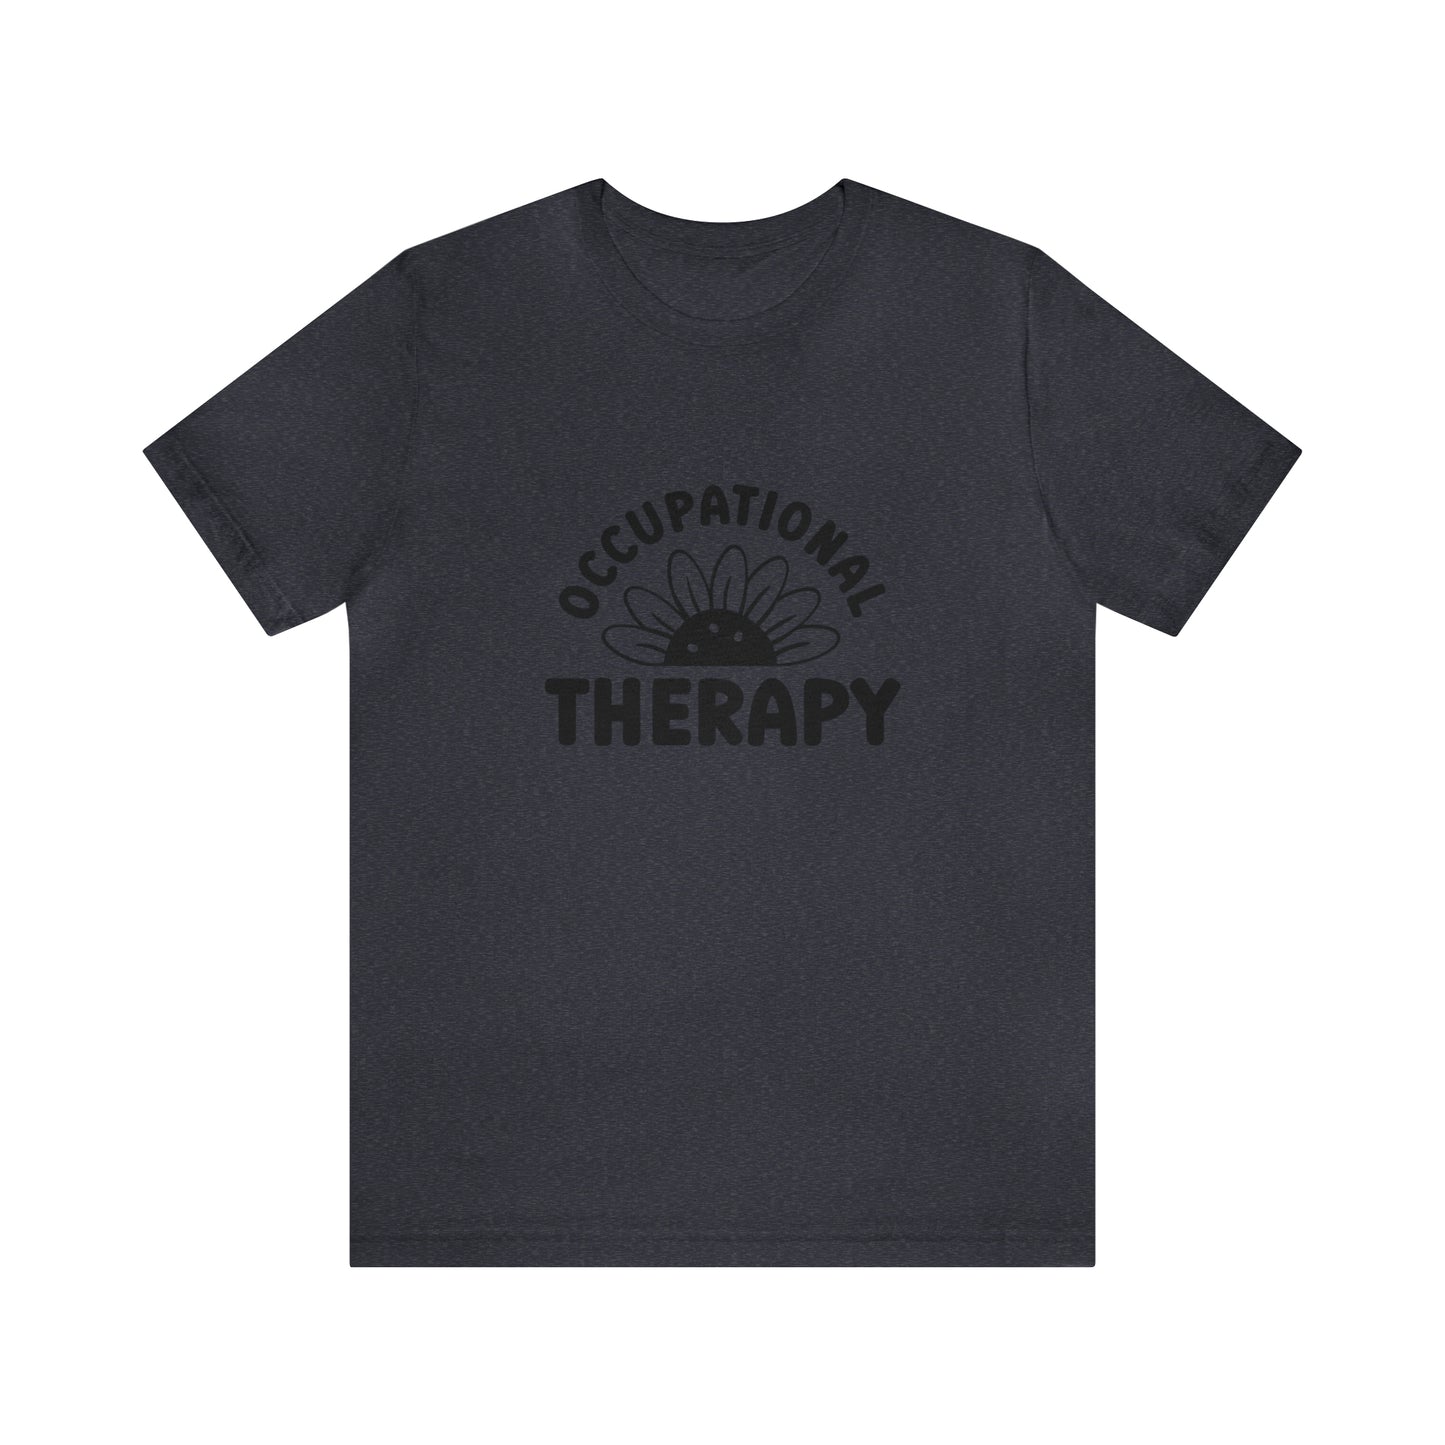 Occupational Therapy Short Sleeve Women's Tee